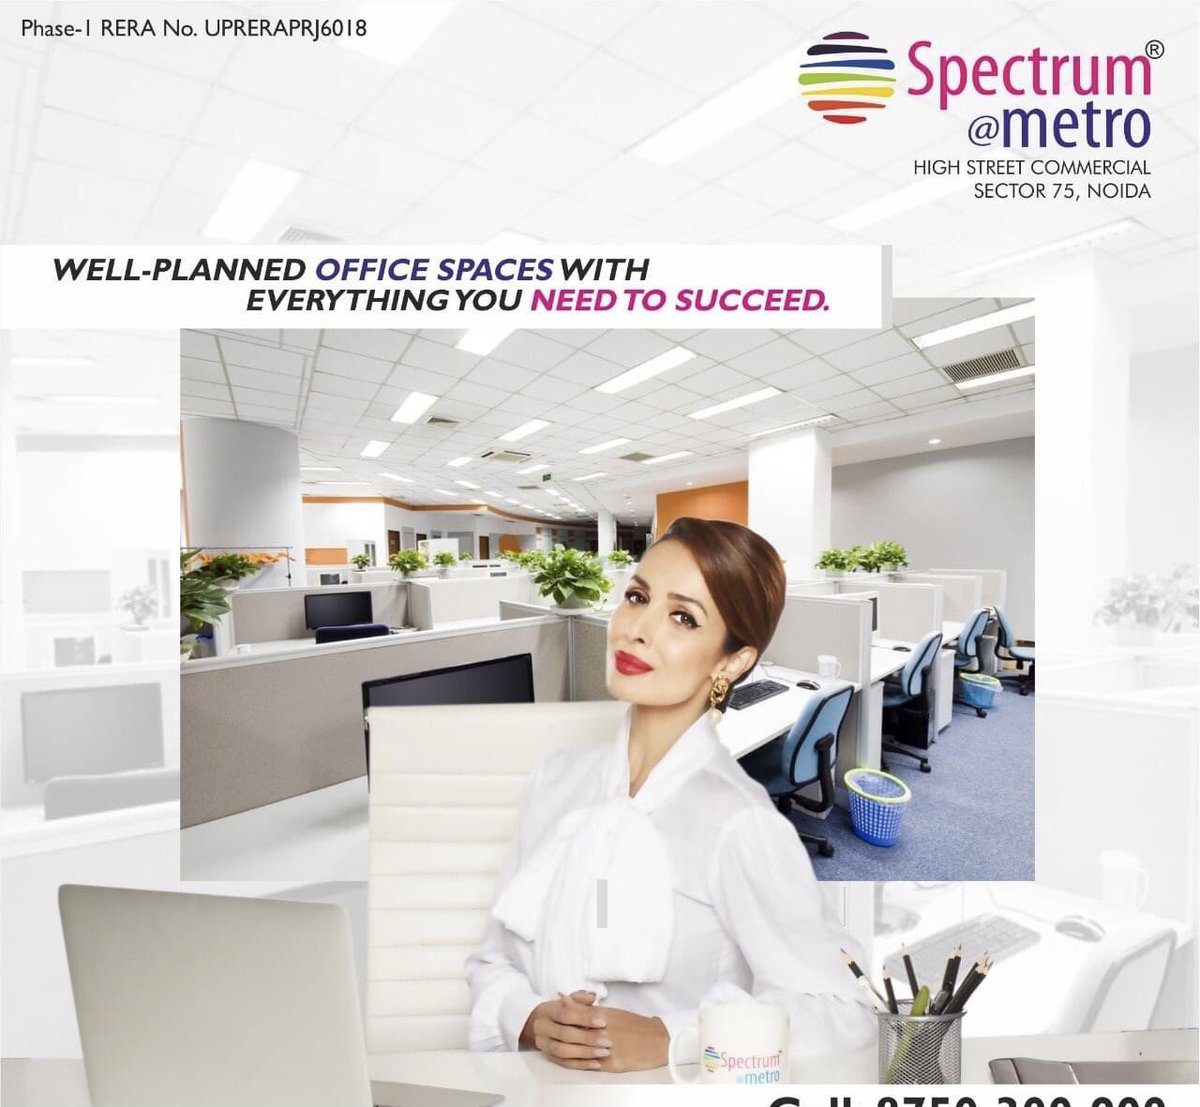 Call-9810329741
Buy Lockable Office Space in Central Noida at Door Step of Sec-50 Metro Station
Get possession in 1.5 Year
#servicedapartment #Noida #buyers #Investment #properties #investors #Broker #spectrummetro